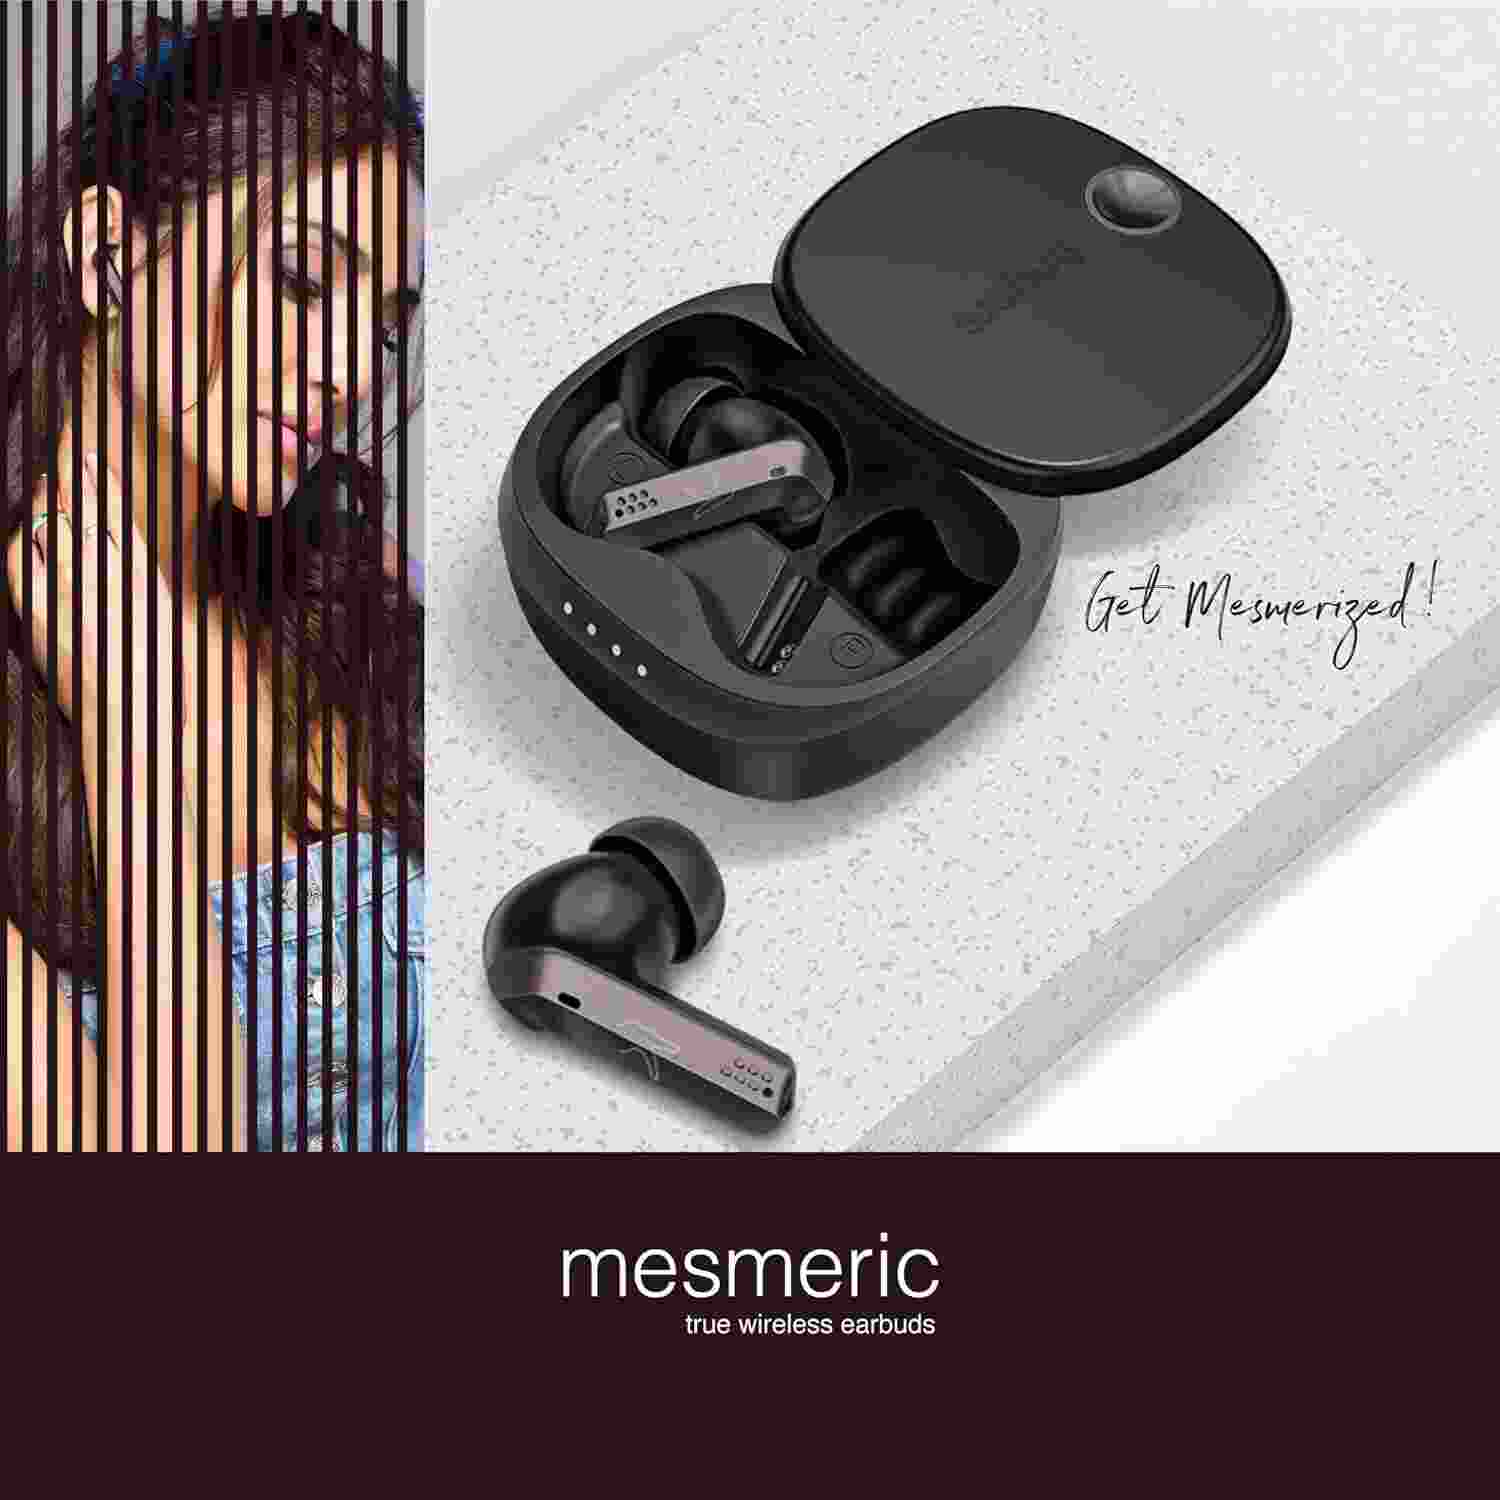 FINGERS Mesmeric TWS Earbuds Immersive Sound with 10 mm Deep bass Drivers, 60 Hours Playtime, Built-in Quad Mics, SNC™ Technology, Quick Charge Type-C Fast Charging (Gun Metal + Black)